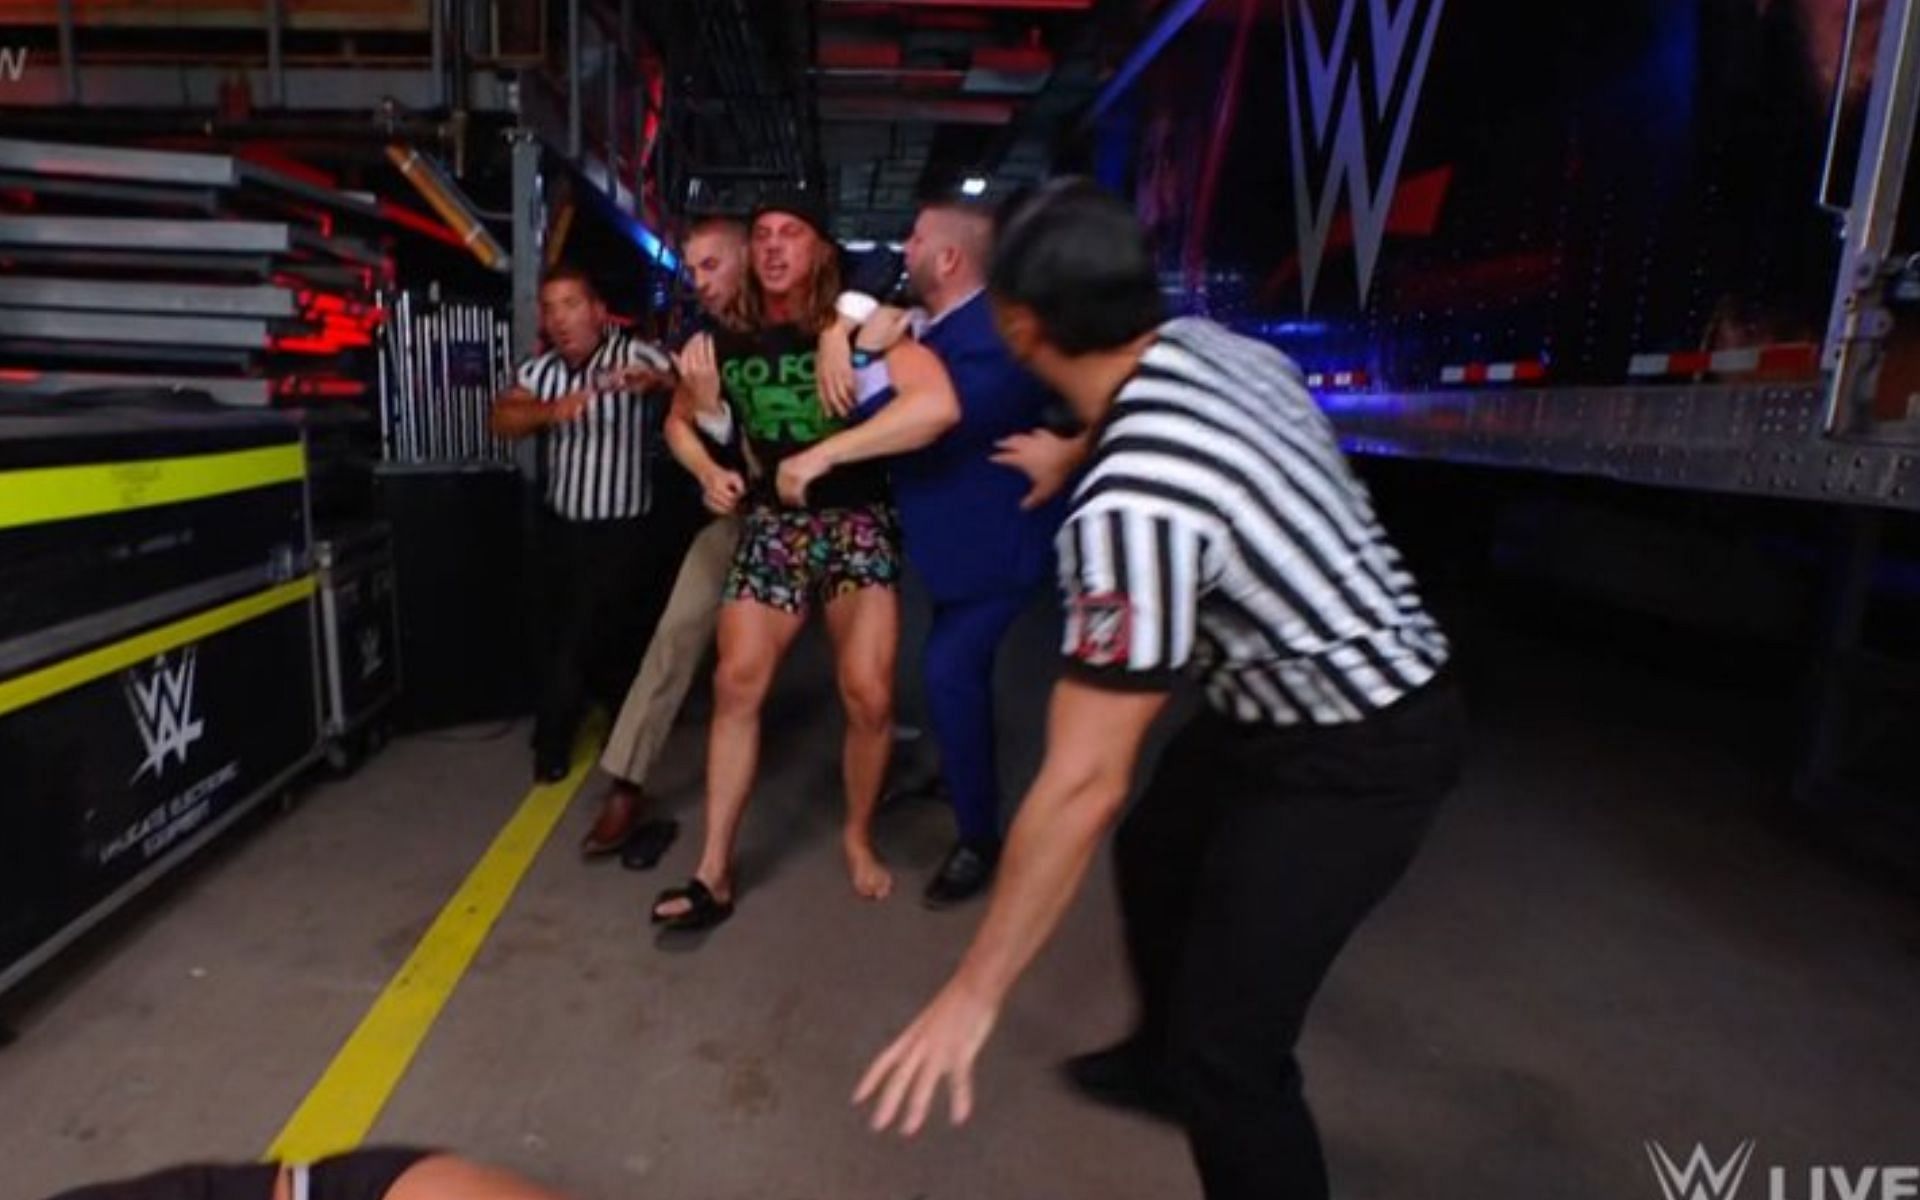 Matt Riddle takes out WWE's pound-for-pound strongest wrestler backstage on RAW